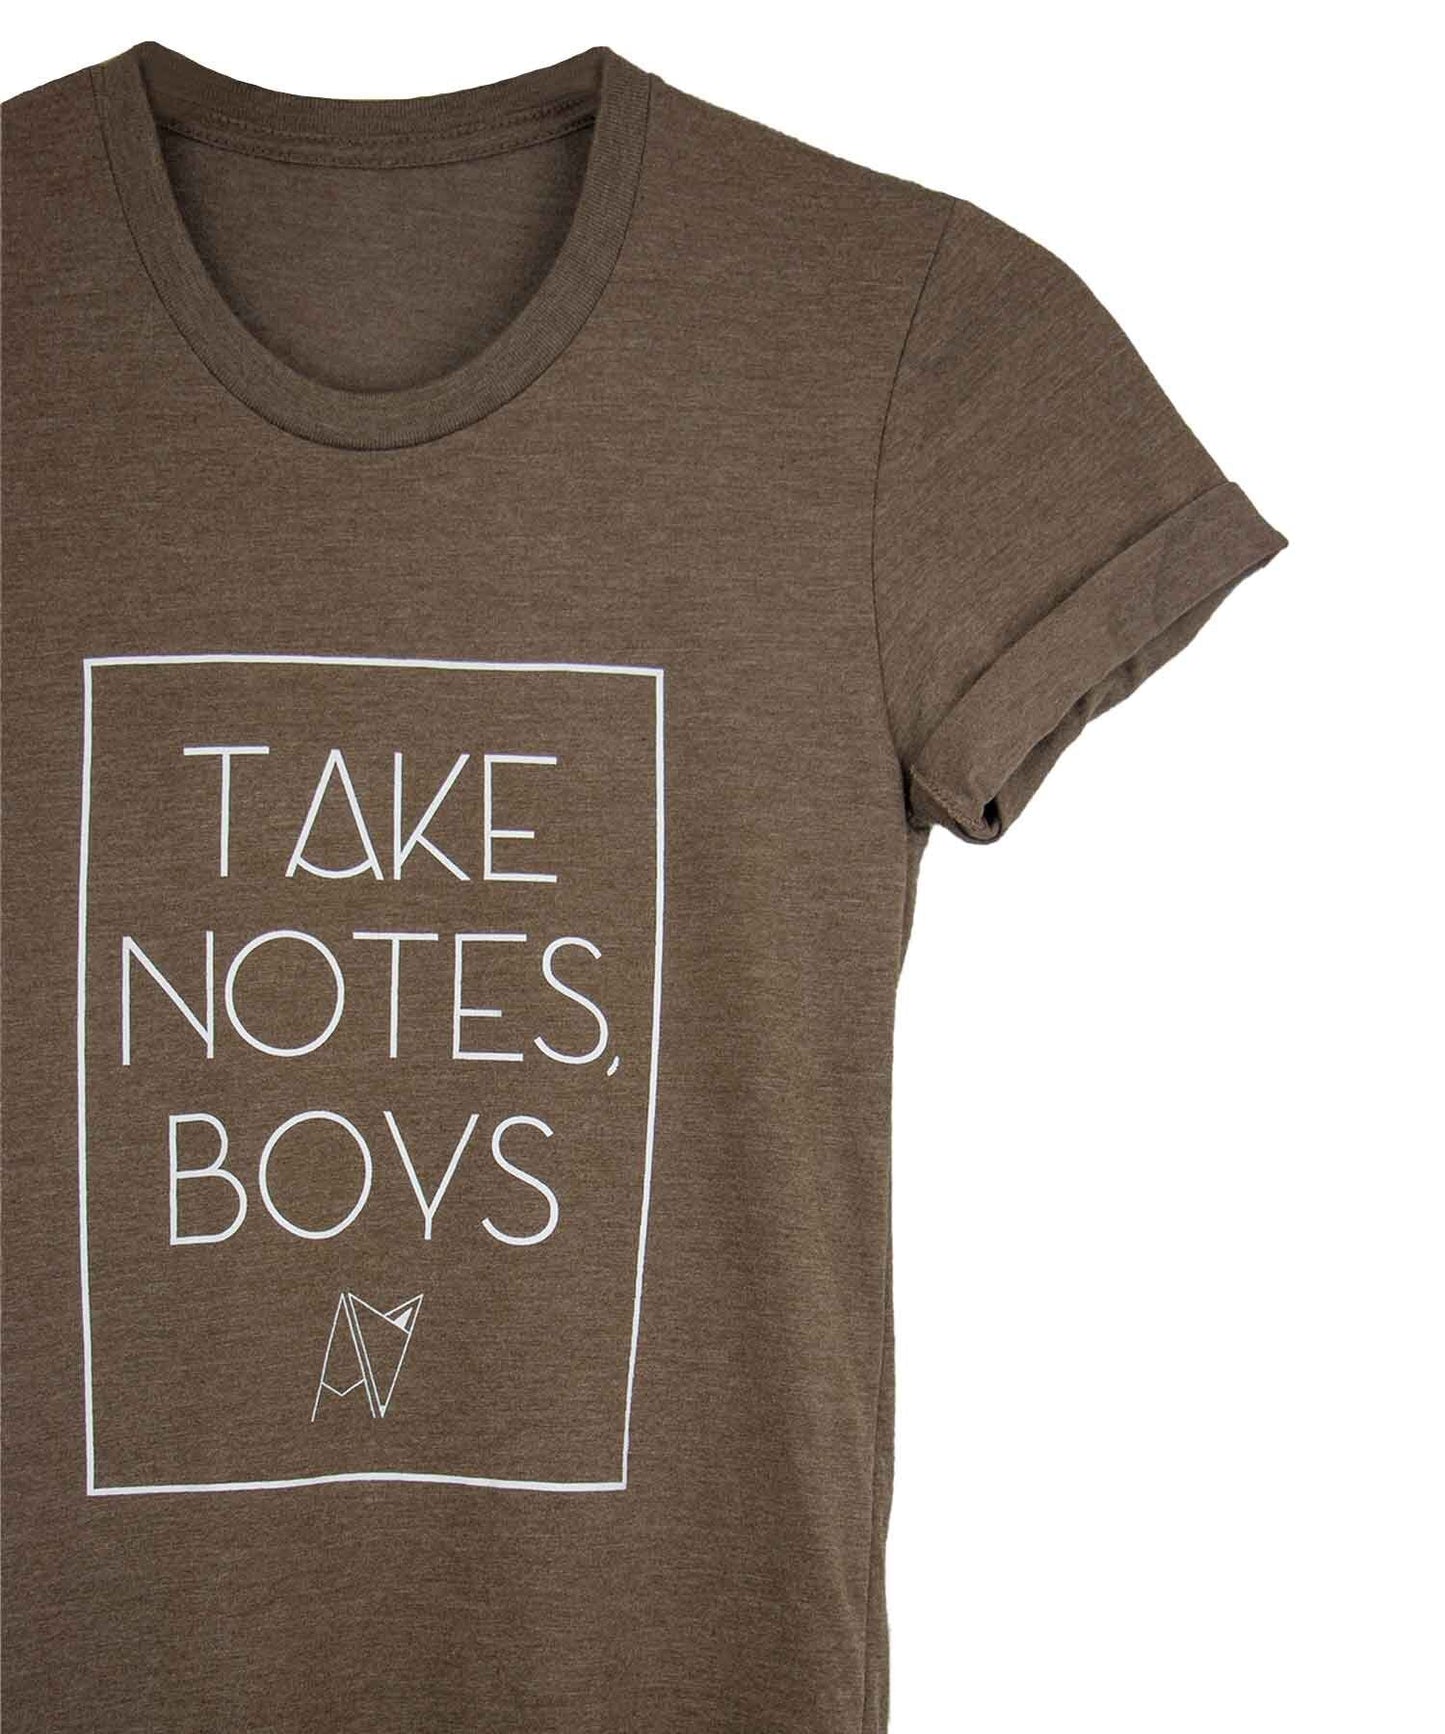 Brown crew neck "take notes boys" t-shirt by Androgynous Fox. 